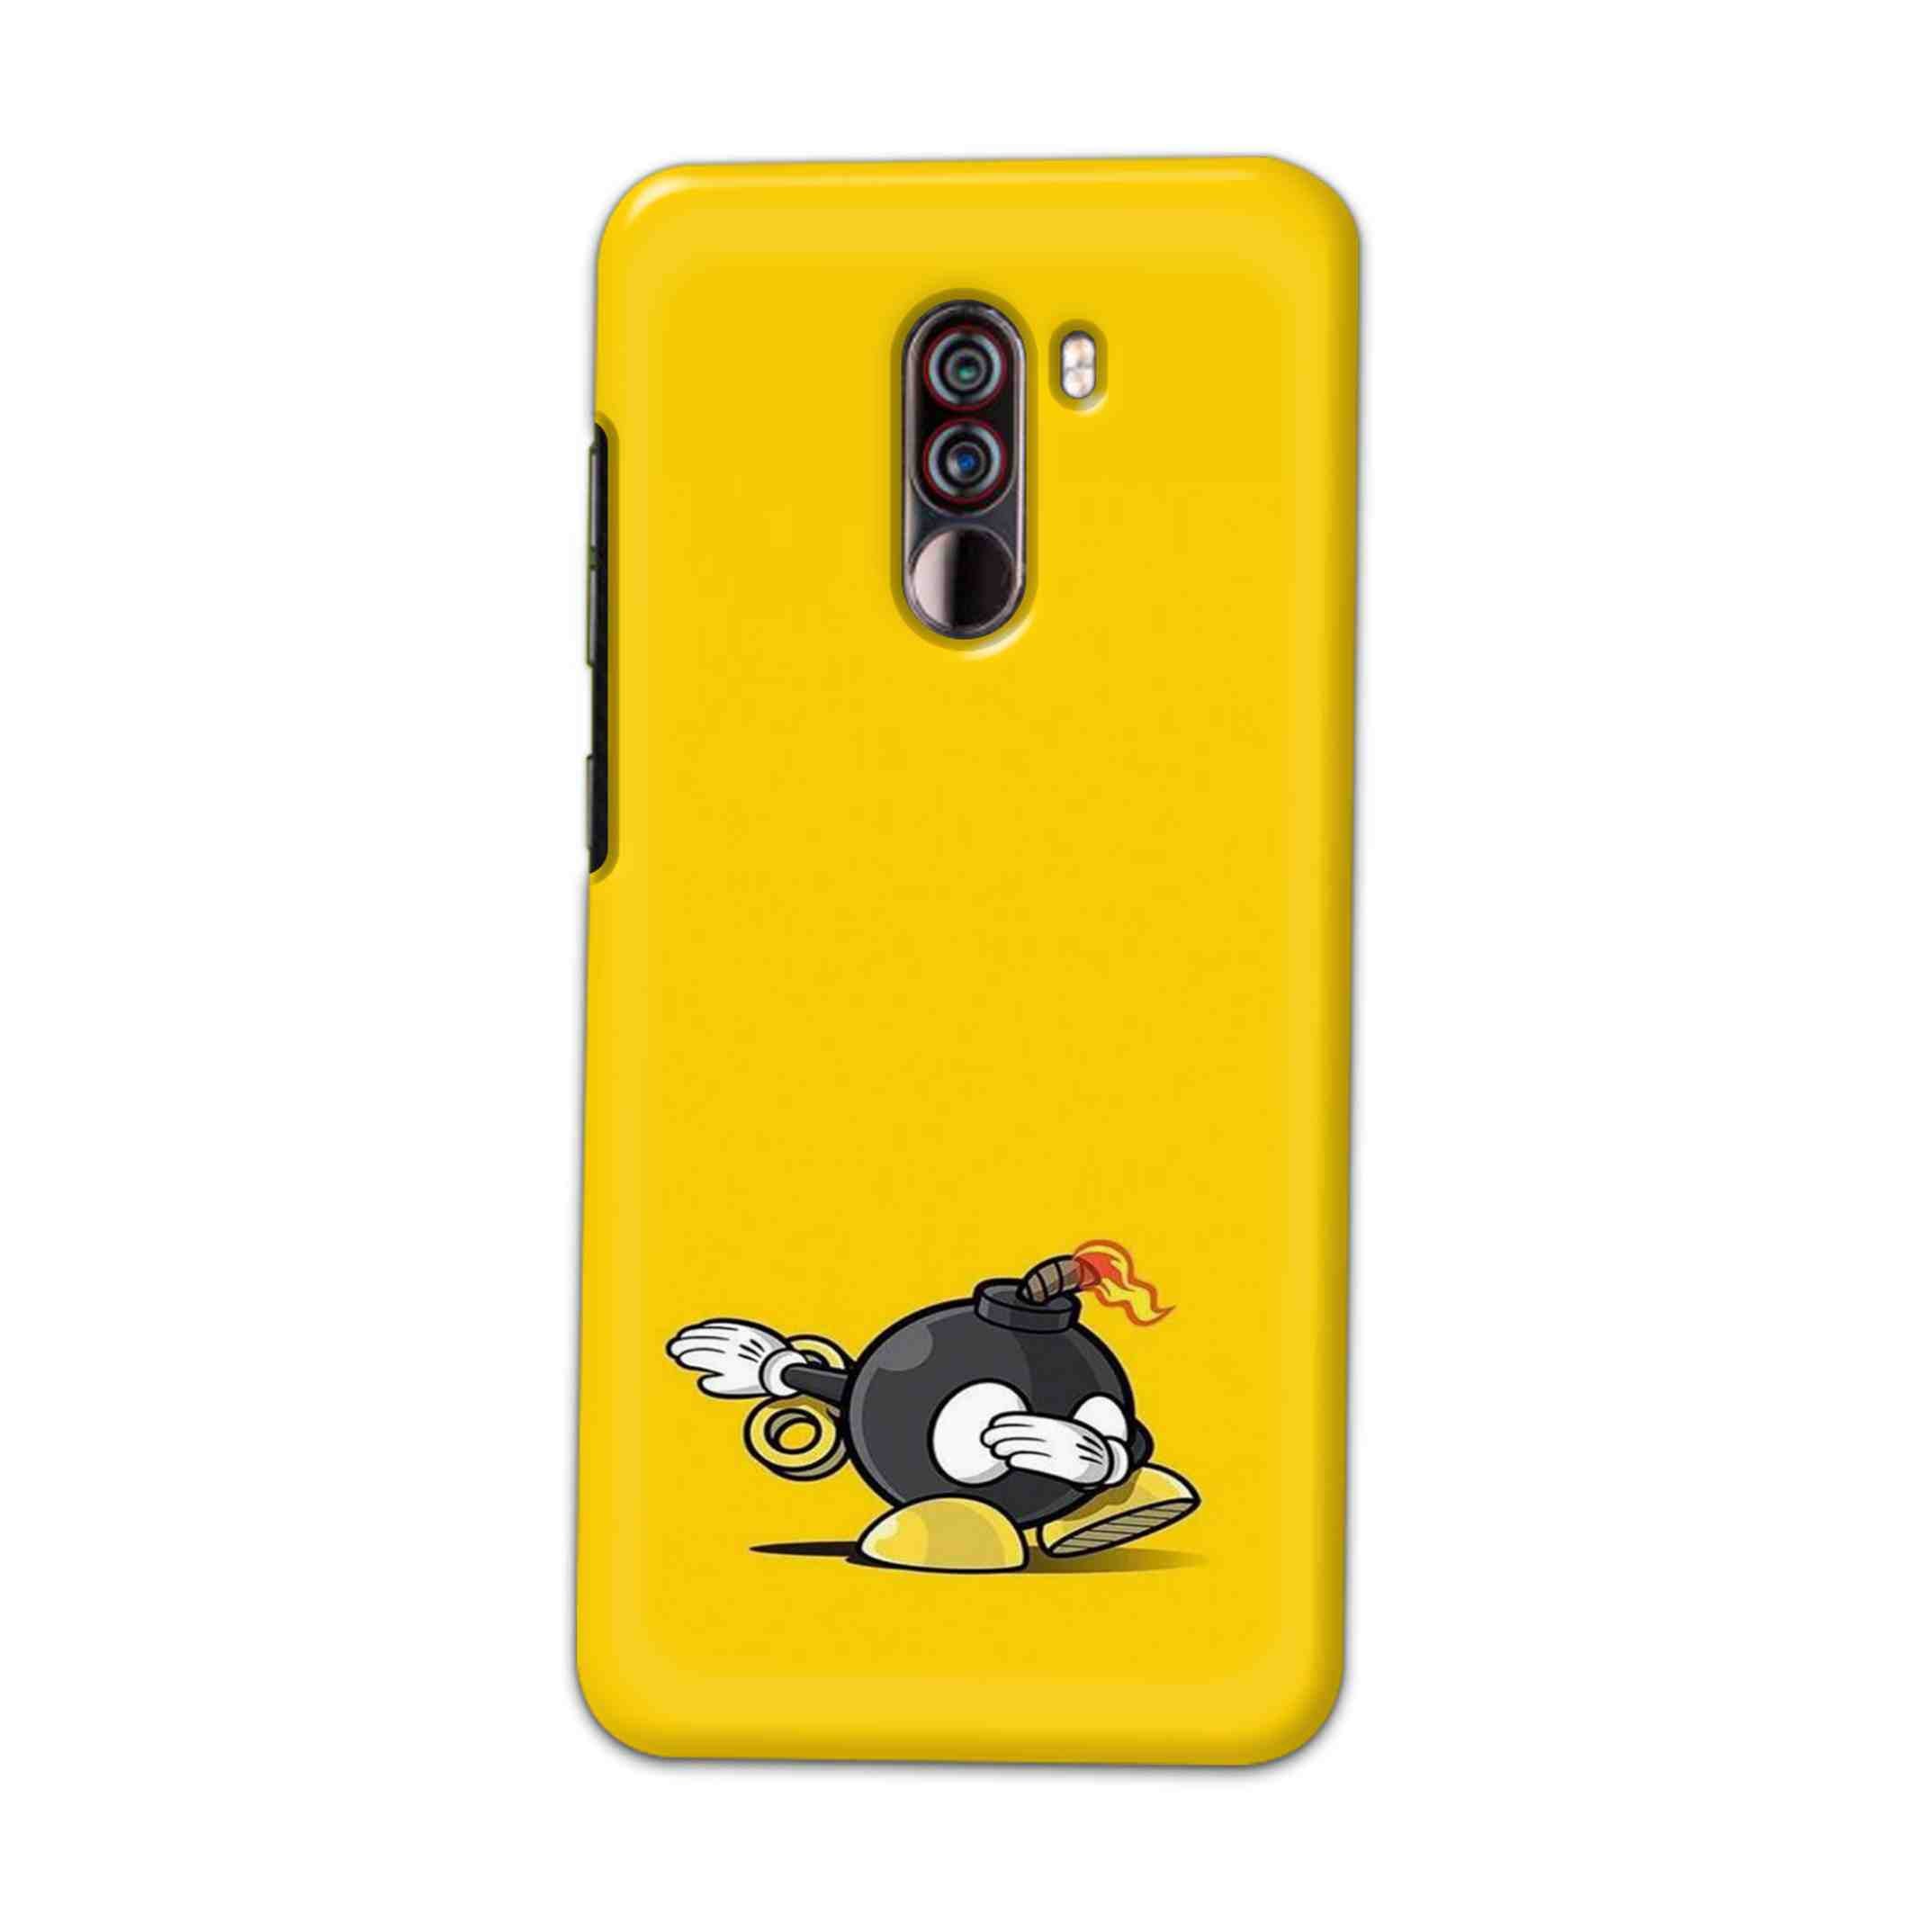 Buy Dashing Bomb Hard Back Mobile Phone Case Cover For Xiaomi Pocophone F1 Online